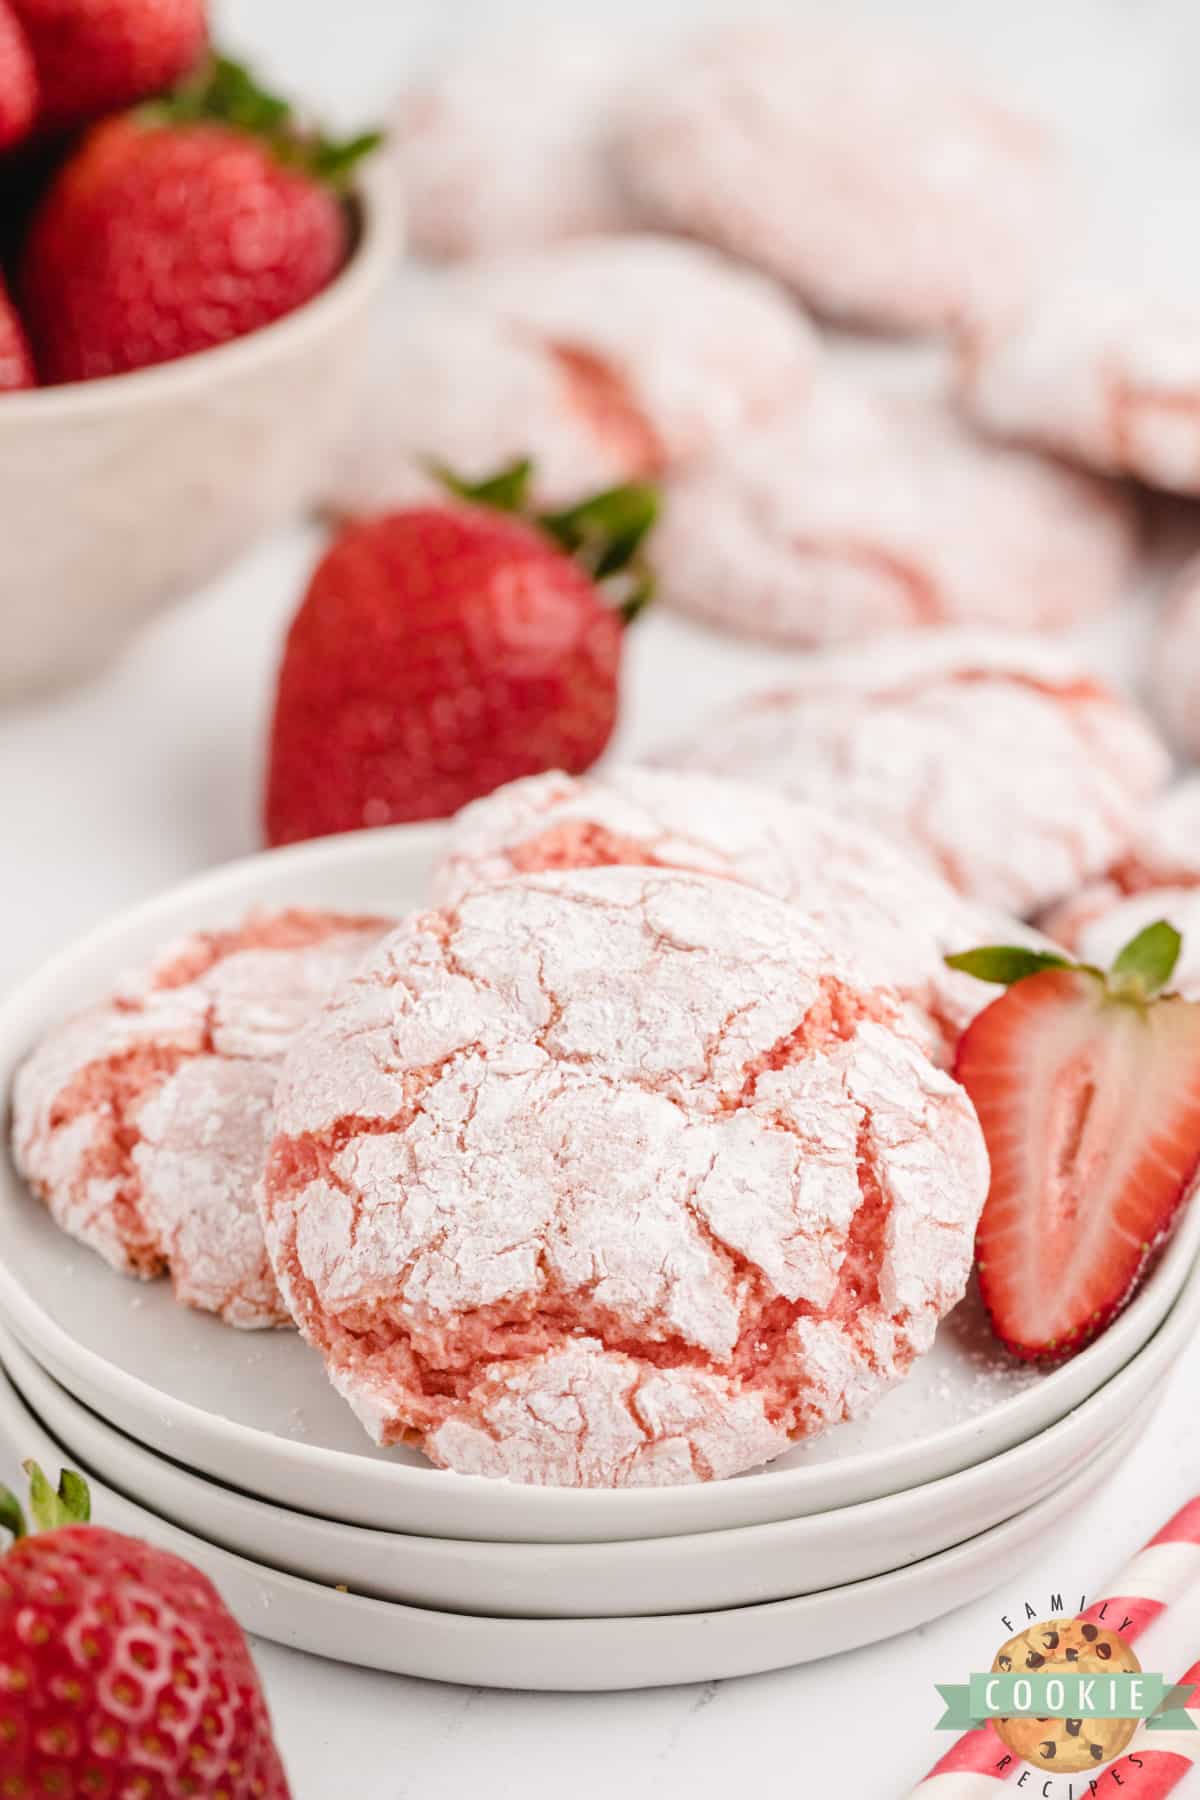 Strawberry cookies made with 3 ingredients